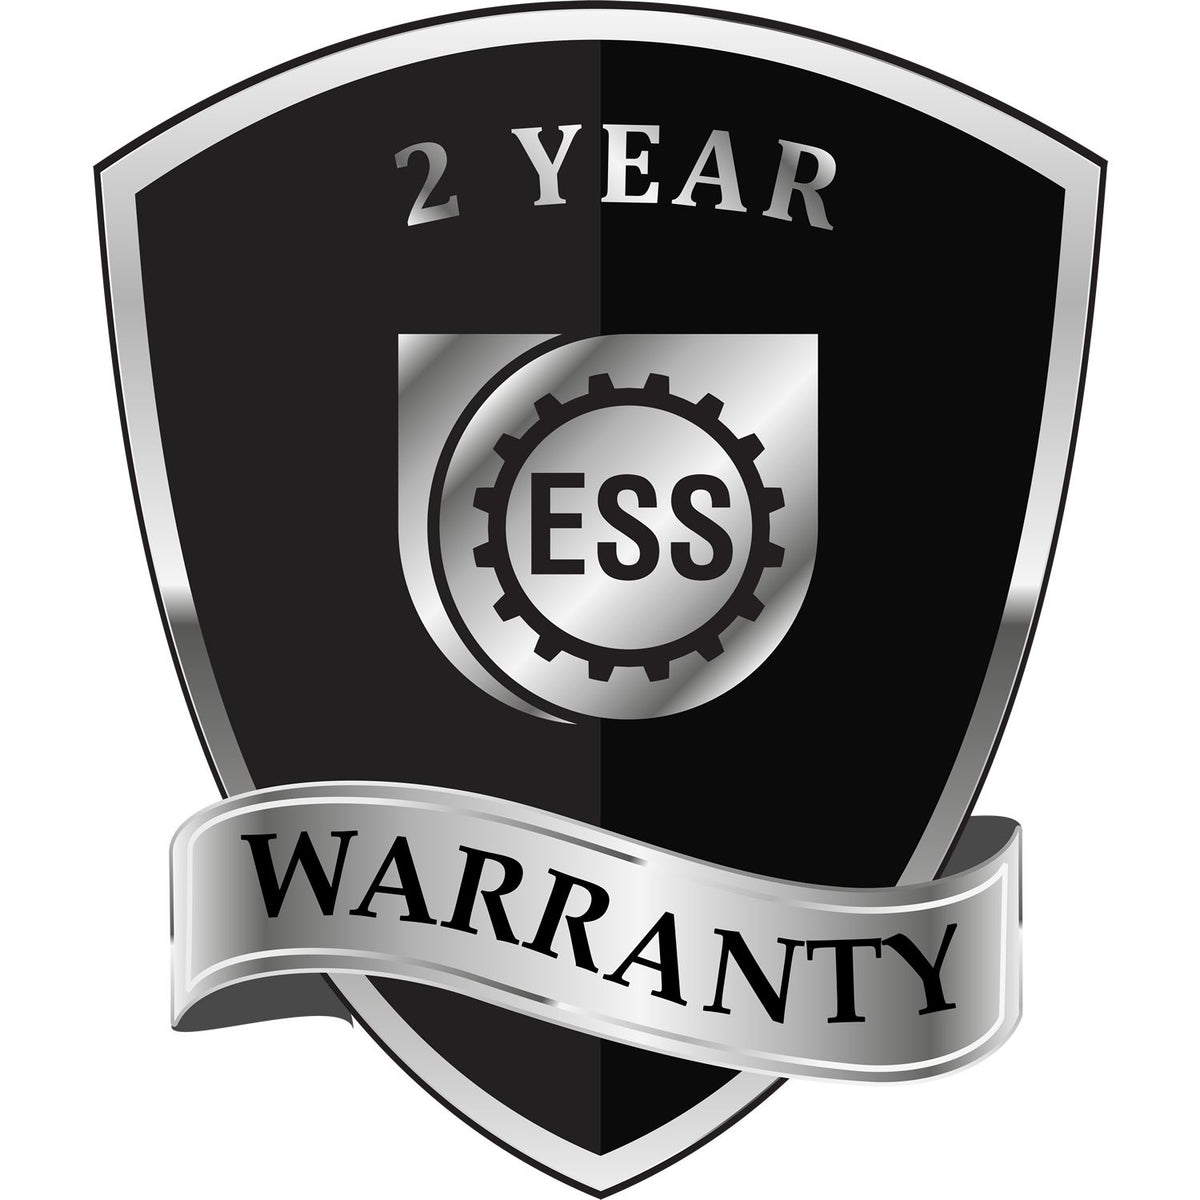 A badge or emblem showing a warranty icon for the Heavy Duty Cast Iron Hawaii Architect Embosser